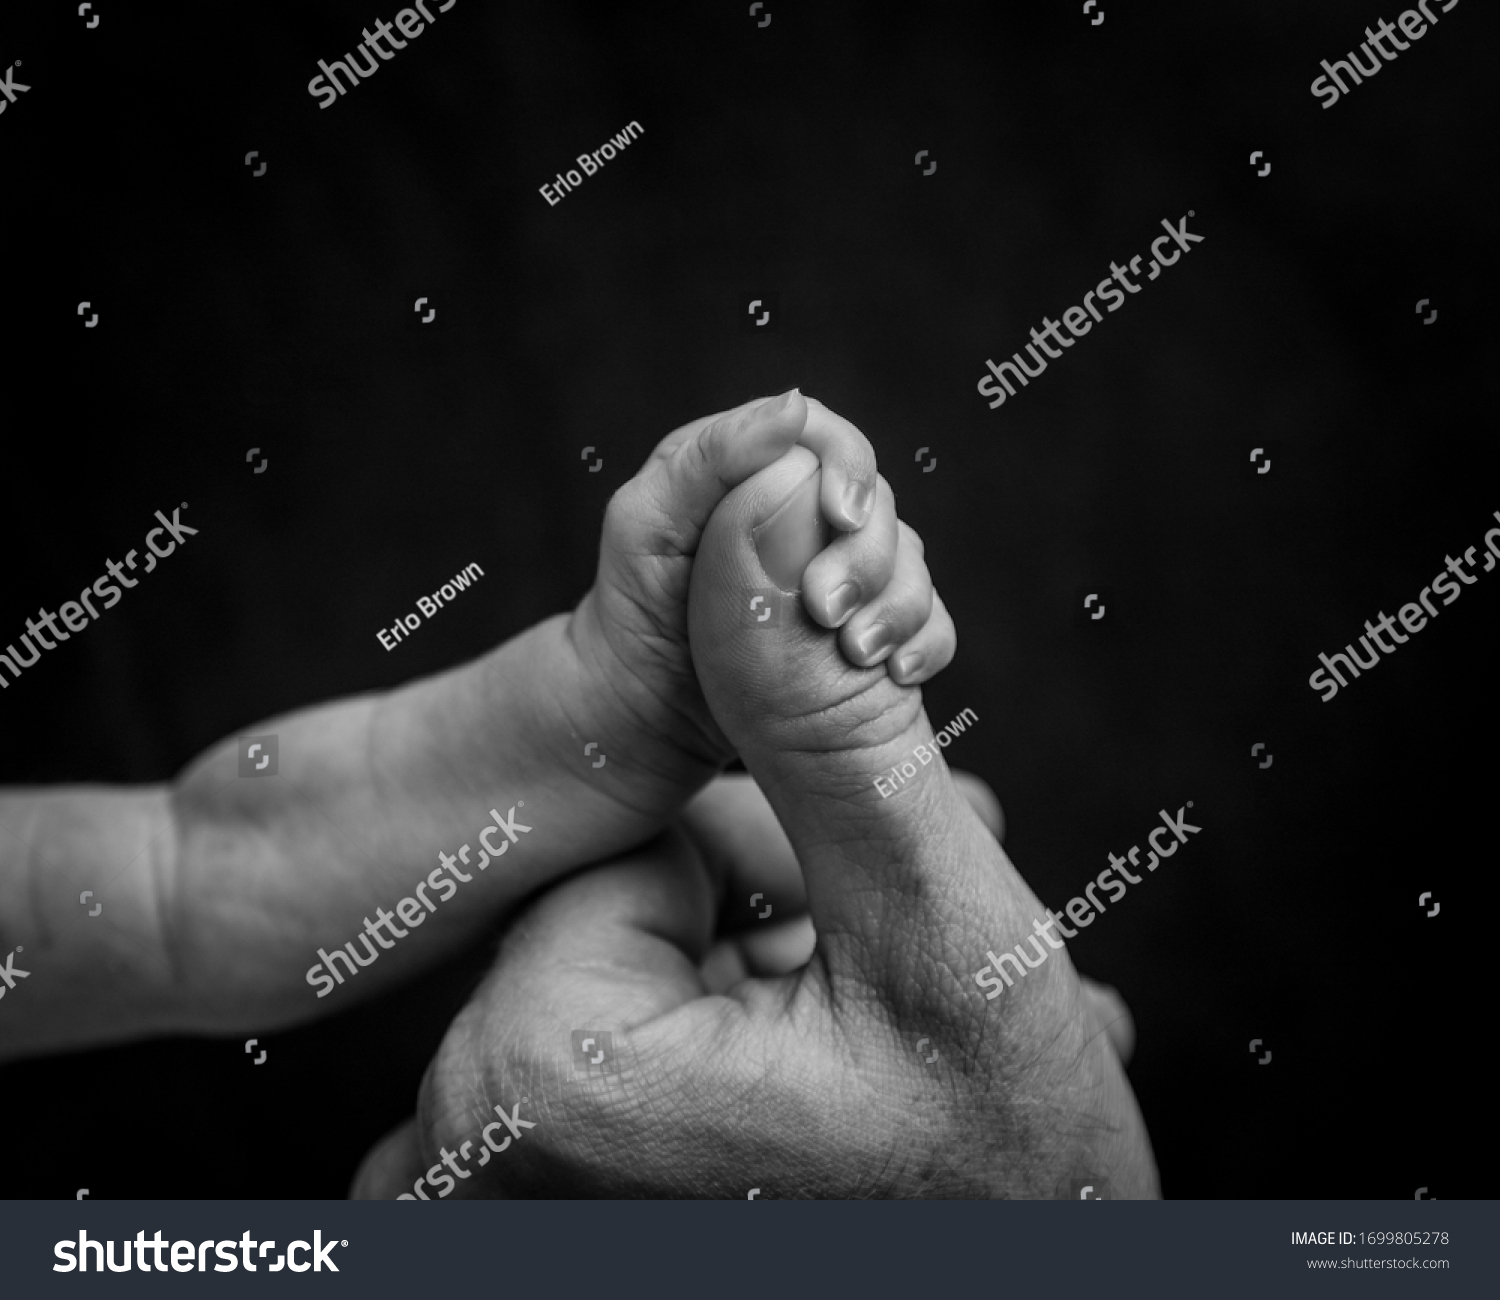 A baby's hand holding a fathers thumb. A newborn baby's grip on their parents hand. #1699805278